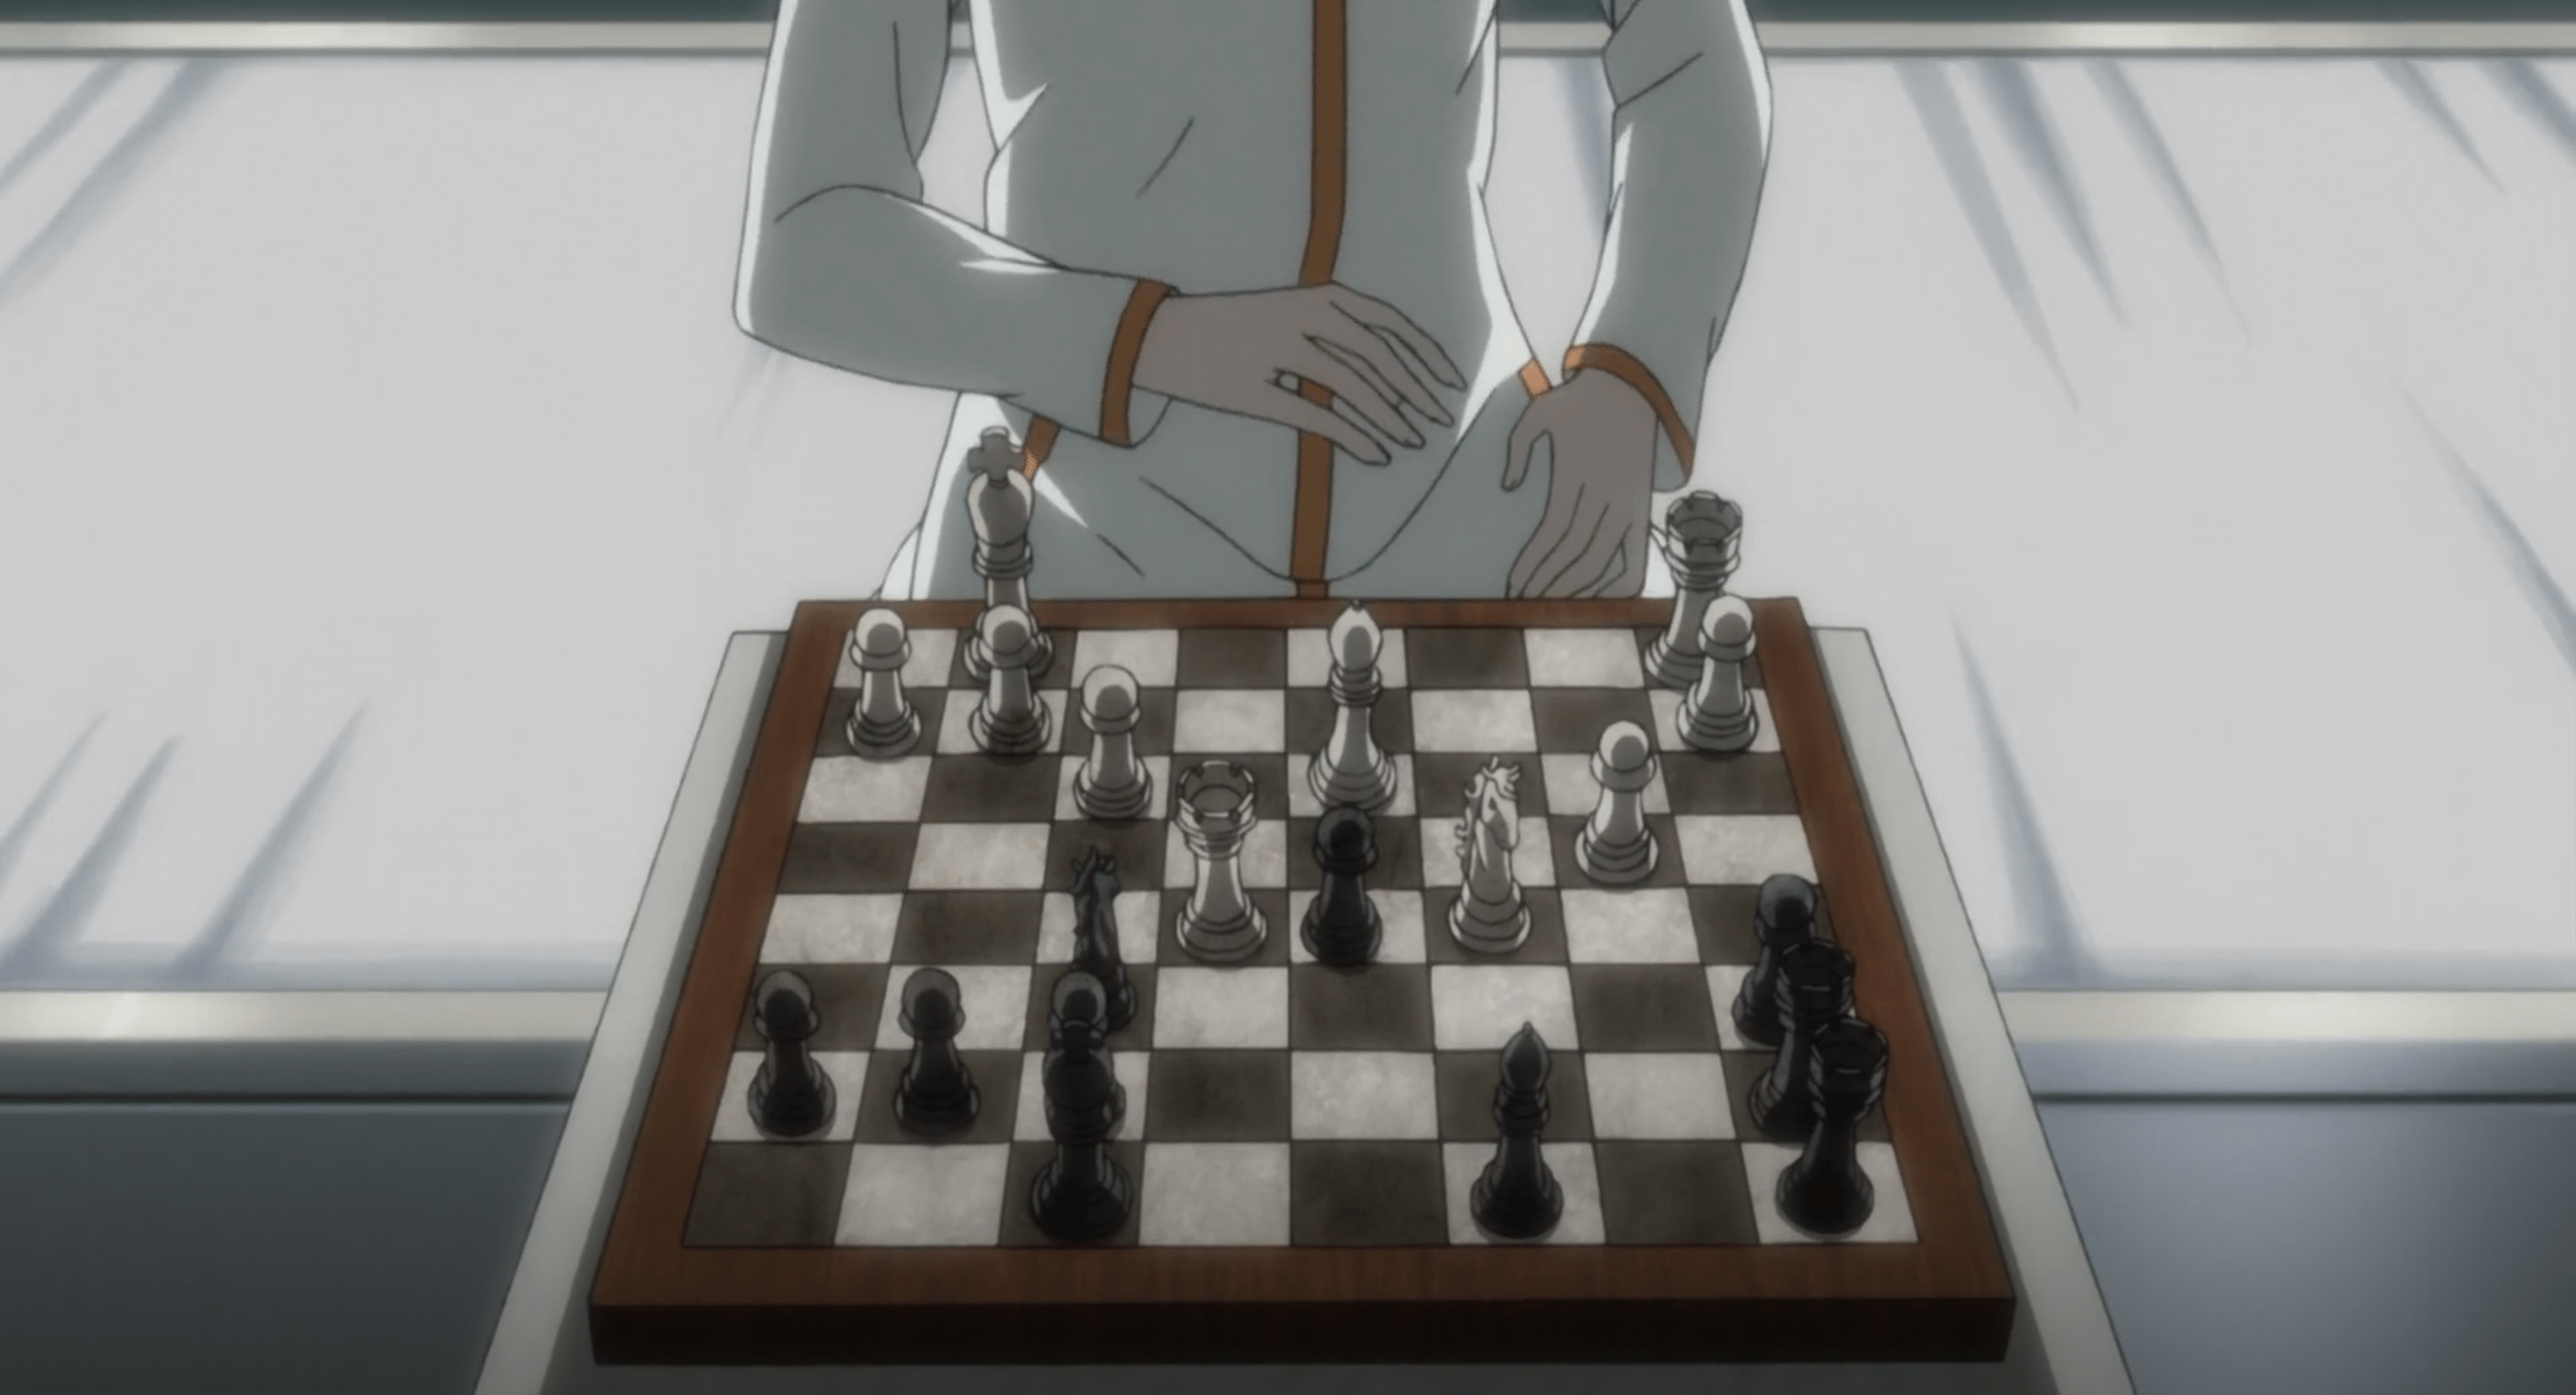 Chess Girls - Other & Anime Background Wallpapers on Desktop Nexus (Image  1839491)